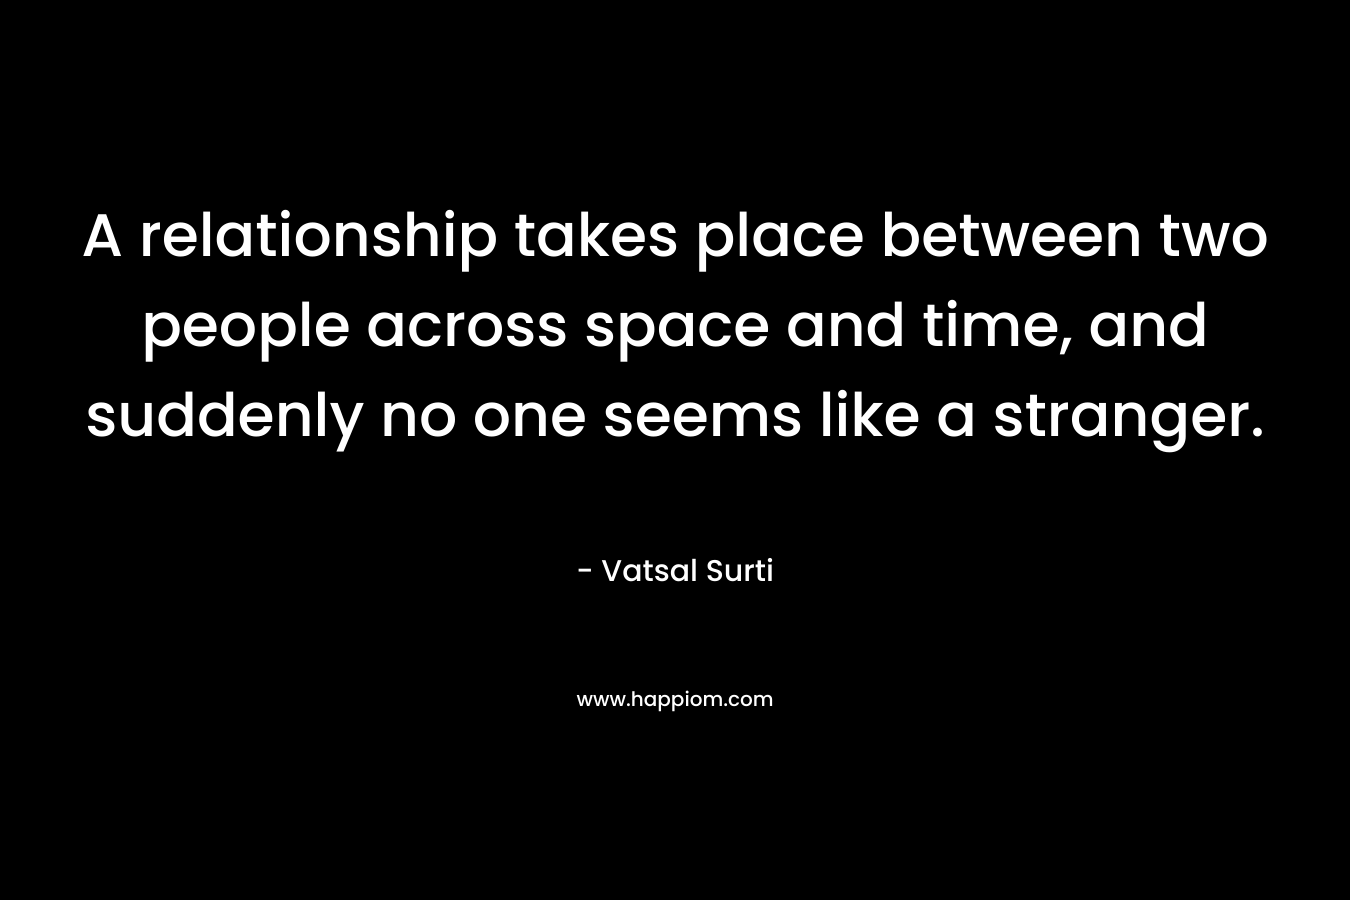 A relationship takes place between two people across space and time, and suddenly no one seems like a stranger.